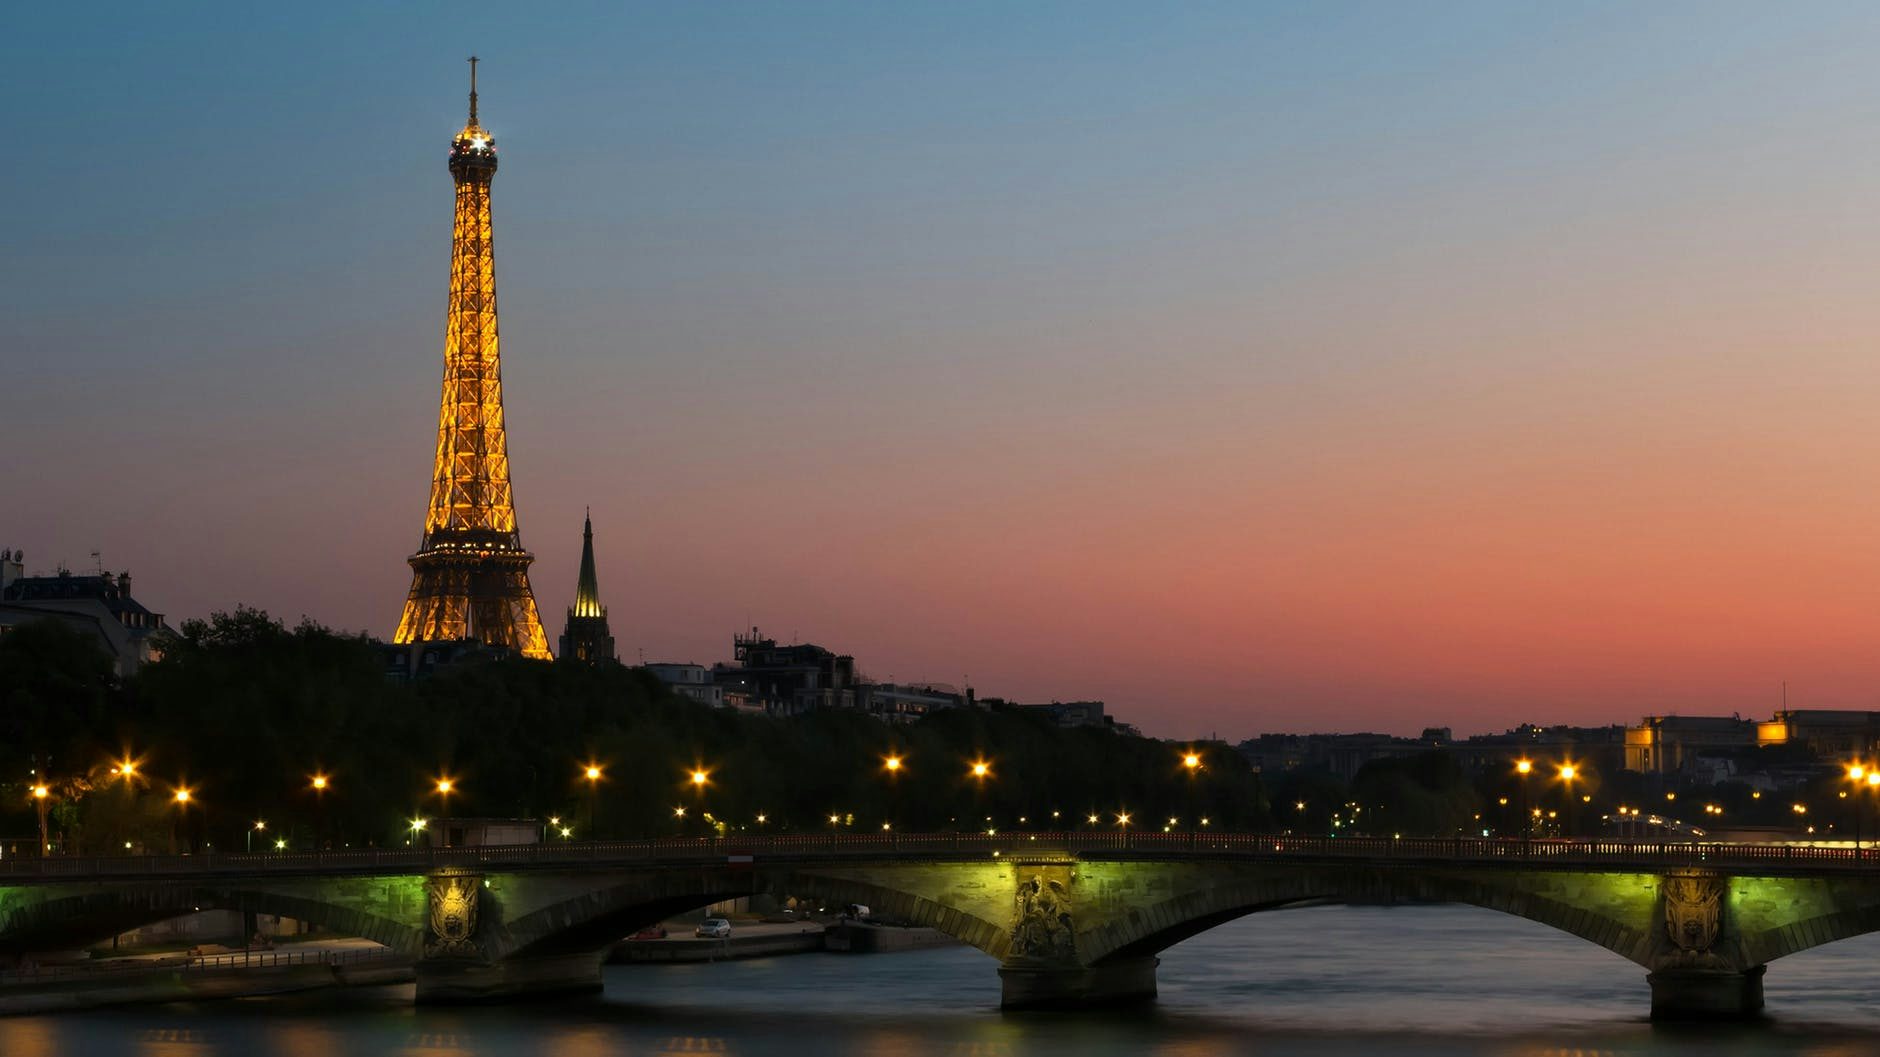 The eiffel tower, beautiful place with a romantic atmosphere!